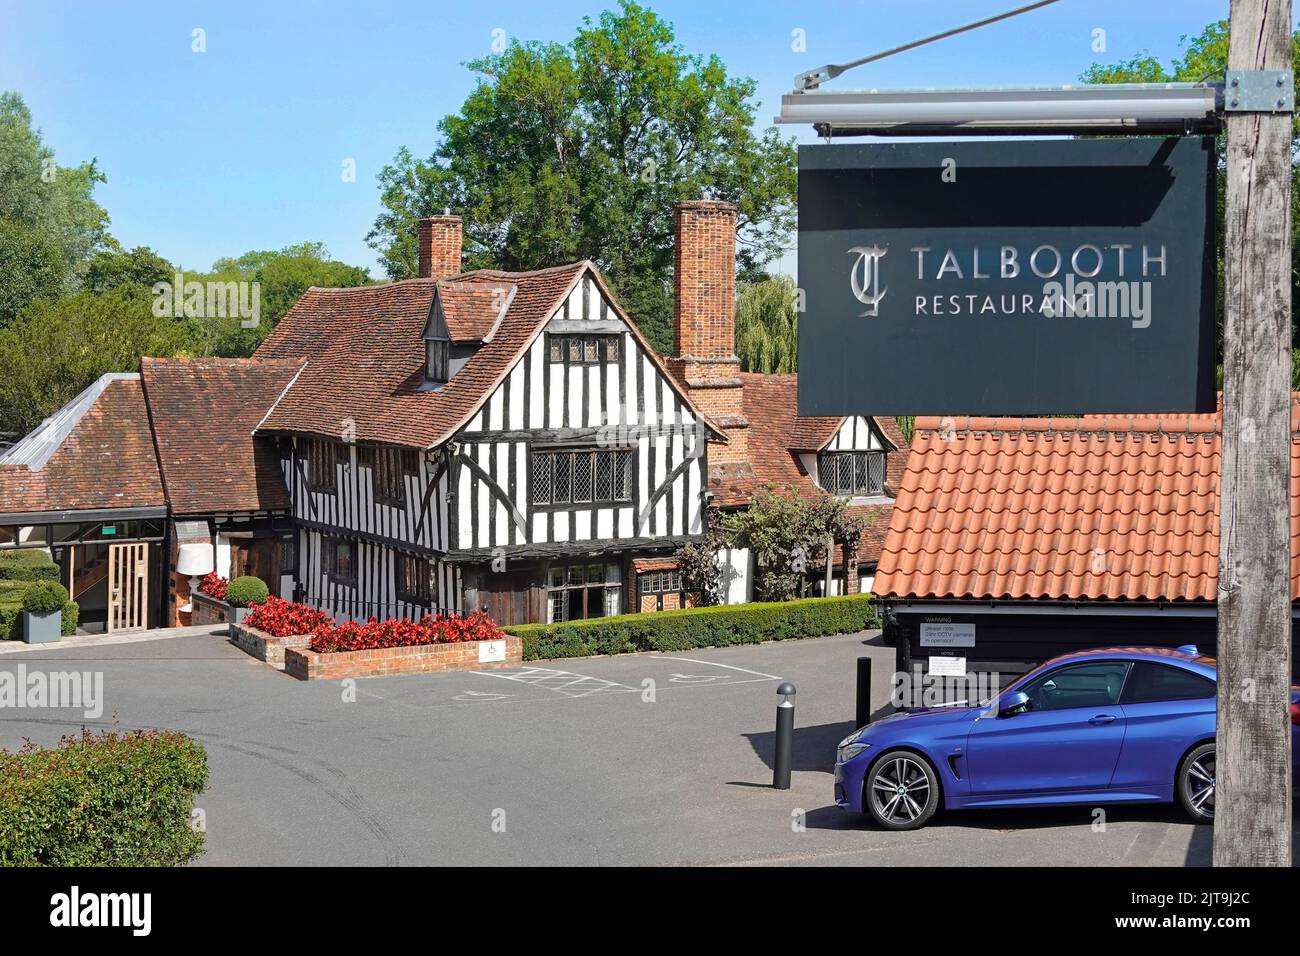 Car park & sign historical Essex Talbooth rural restaurant & wedding venue has riverside facilities beside River Stour in Constable country England UK Stock Photo